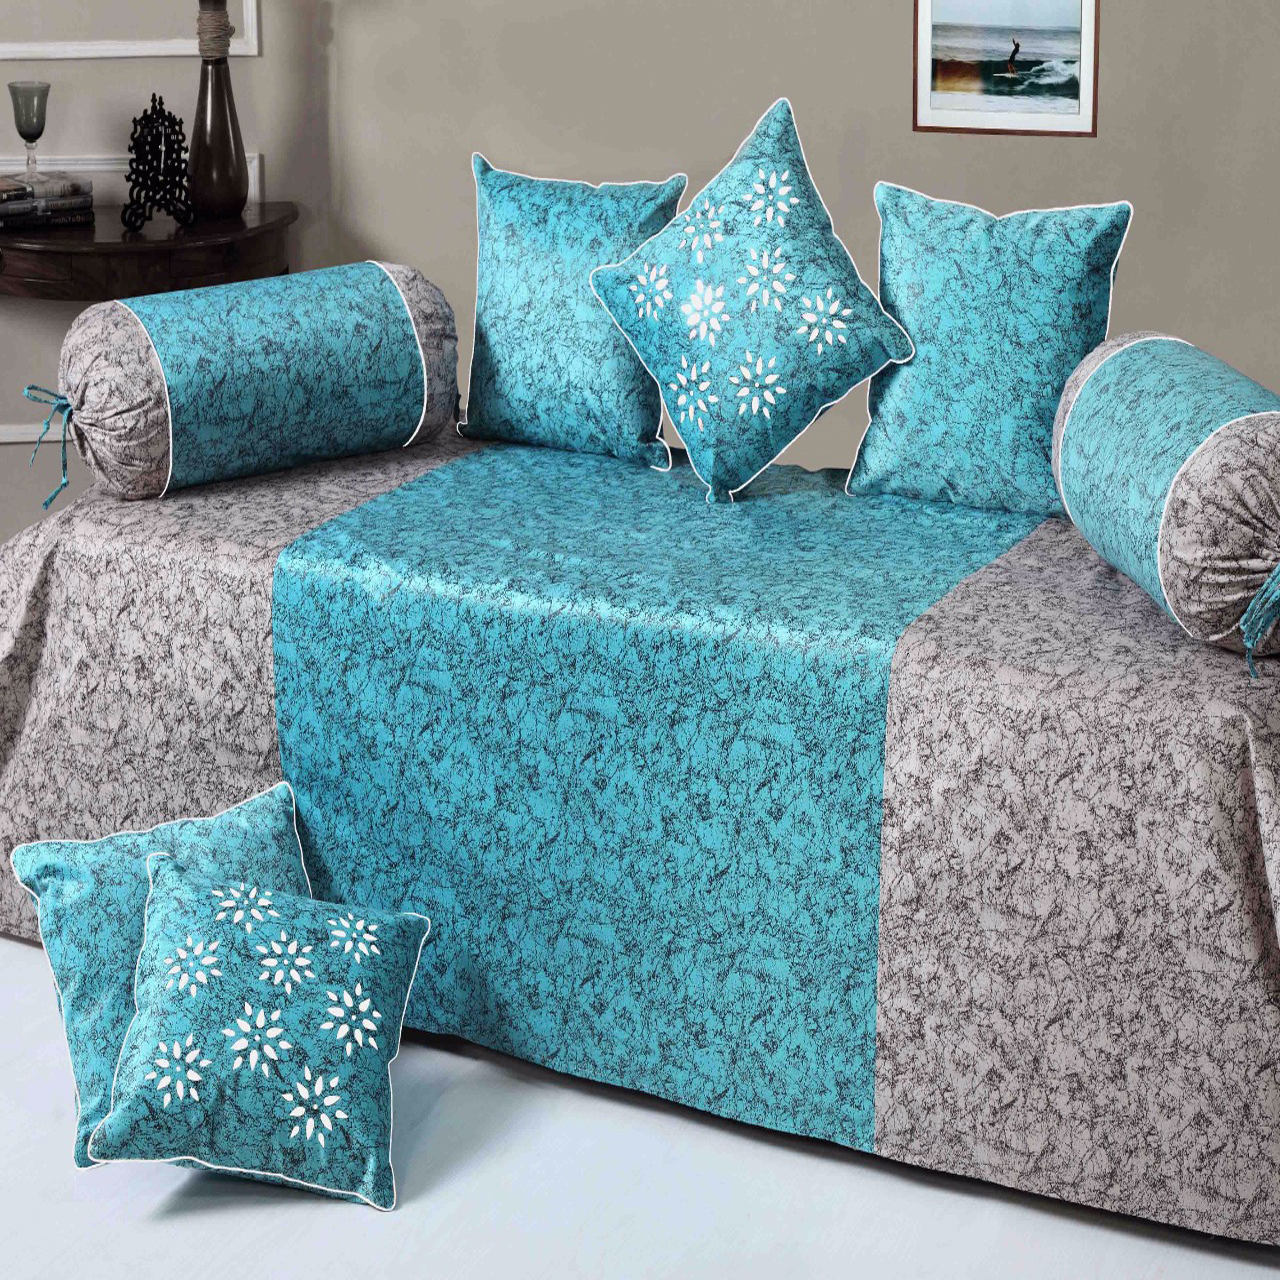 HandTex Home Blue & Grey Color Designer Velvet Diwan set 1 Single Bedsheet With 5 Cushion Covers and 2 Blosters Covers